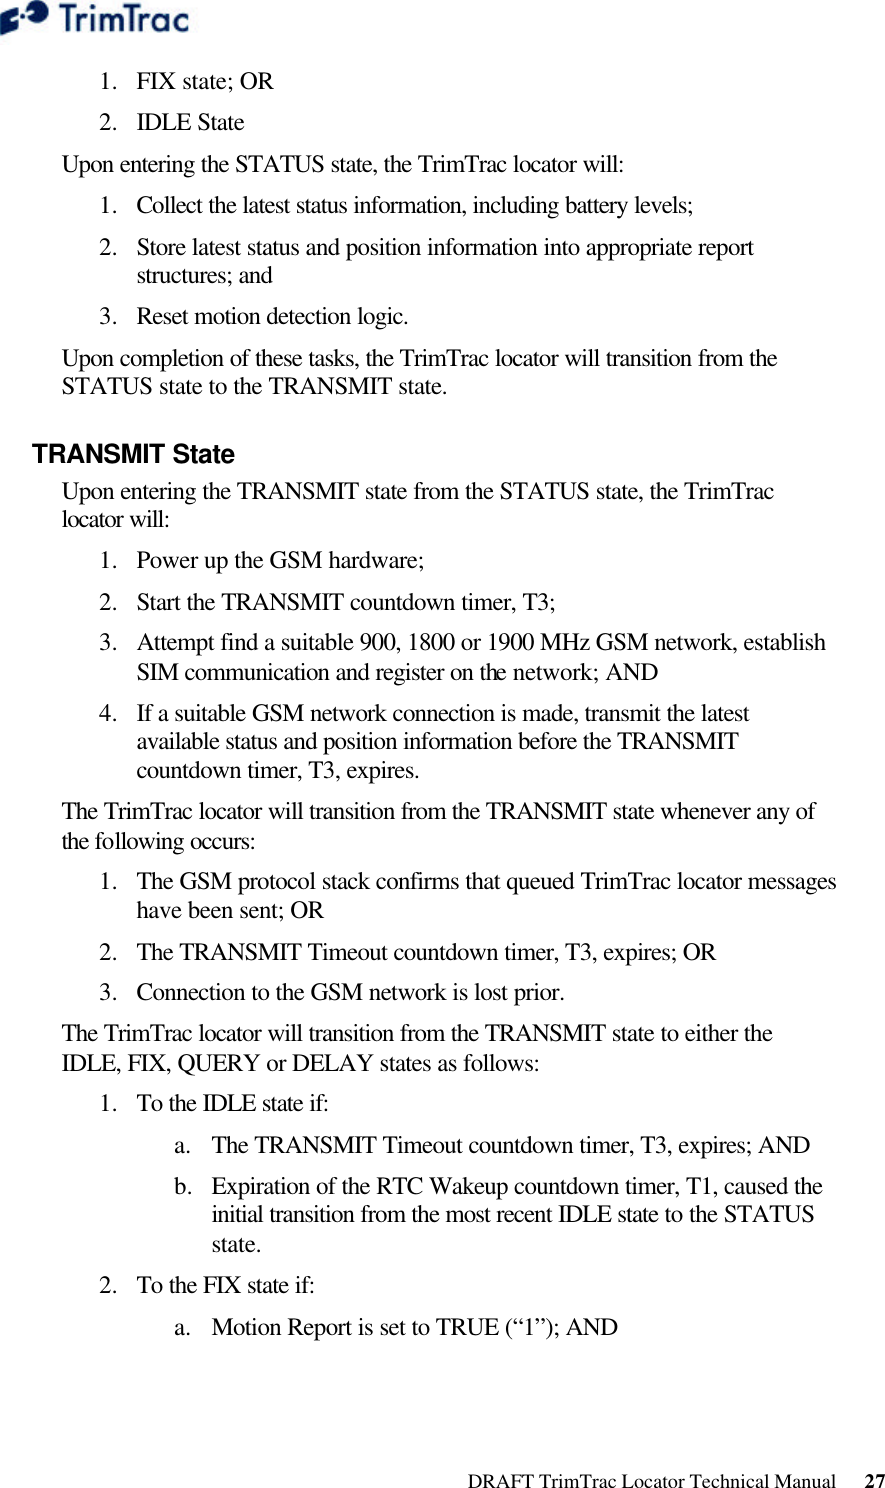  DRAFT TrimTrac Locator Technical Manual      27 1.  FIX state; OR 2.  IDLE State Upon entering the STATUS state, the TrimTrac locator will: 1.  Collect the latest status information, including battery levels; 2.  Store latest status and position information into appropriate report structures; and 3.  Reset motion detection logic. Upon completion of these tasks, the TrimTrac locator will transition from the STATUS state to the TRANSMIT state. TRANSMIT State Upon entering the TRANSMIT state from the STATUS state, the TrimTrac locator will: 1.  Power up the GSM hardware; 2.  Start the TRANSMIT countdown timer, T3; 3.  Attempt find a suitable 900, 1800 or 1900 MHz GSM network, establish SIM communication and register on the network; AND 4.  If a suitable GSM network connection is made, transmit the latest available status and position information before the TRANSMIT countdown timer, T3, expires. The TrimTrac locator will transition from the TRANSMIT state whenever any of the following occurs: 1.  The GSM protocol stack confirms that queued TrimTrac locator messages have been sent; OR 2.  The TRANSMIT Timeout countdown timer, T3, expires; OR 3.  Connection to the GSM network is lost prior. The TrimTrac locator will transition from the TRANSMIT state to either the IDLE, FIX, QUERY or DELAY states as follows: 1.  To the IDLE state if: a. The TRANSMIT Timeout countdown timer, T3, expires; AND b.  Expiration of the RTC Wakeup countdown timer, T1, caused the initial transition from the most recent IDLE state to the STATUS state. 2.  To the FIX state if: a. Motion Report is set to TRUE (“1”); AND 